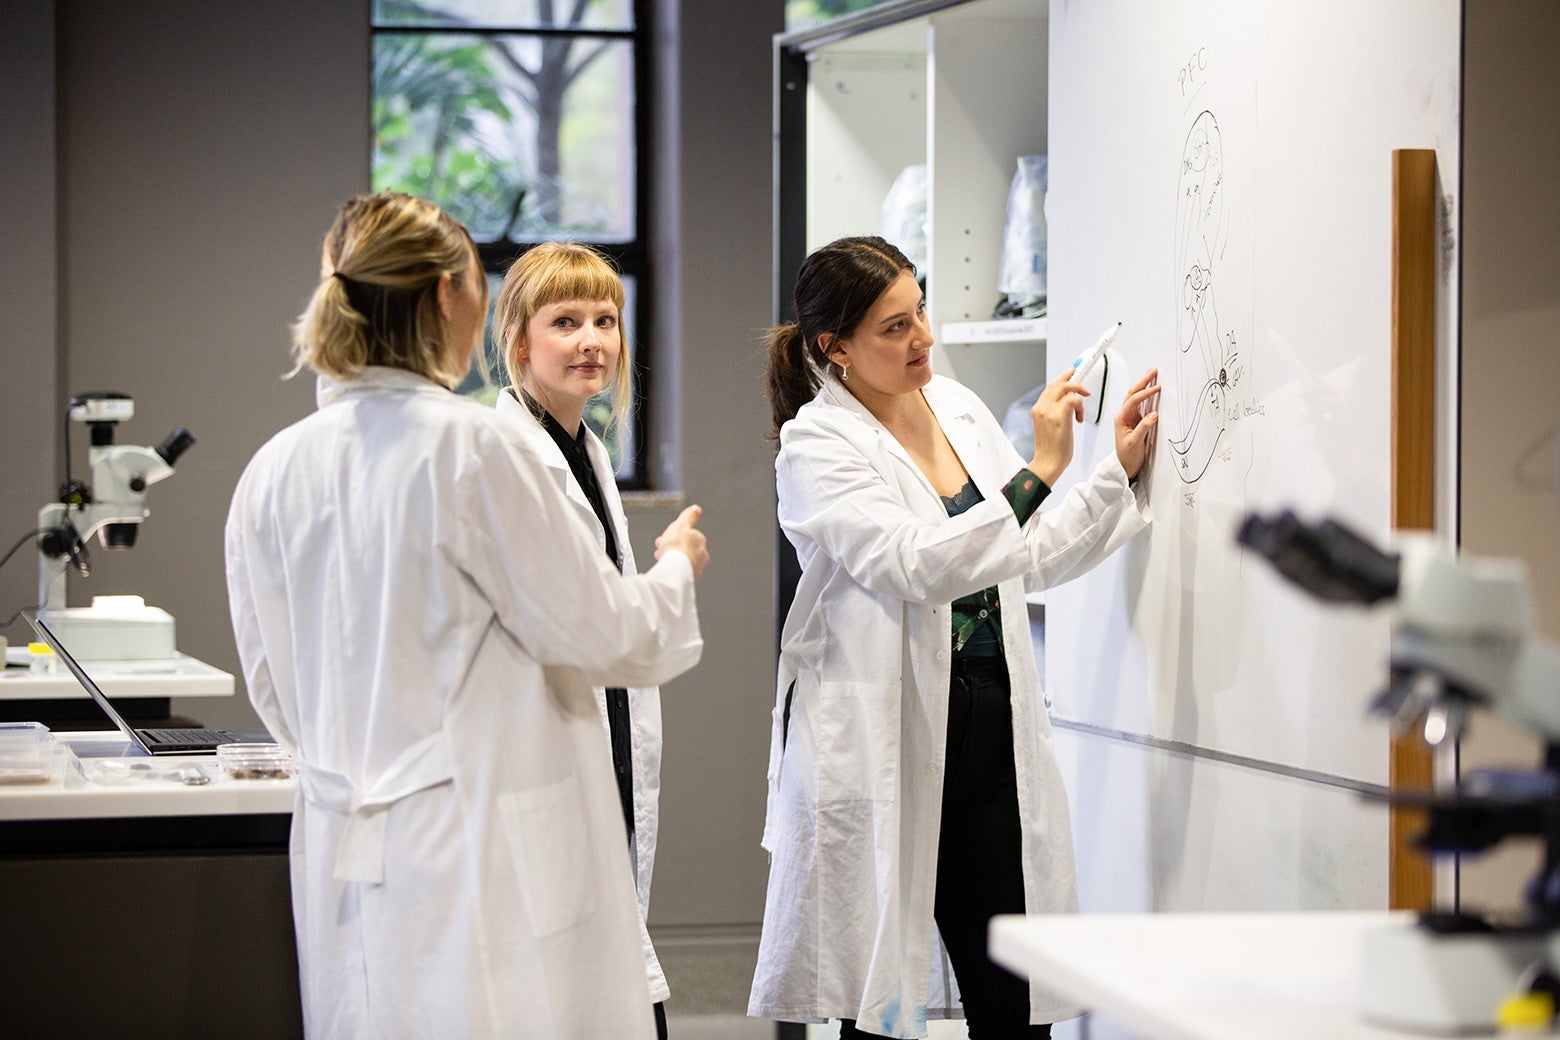 Three women in white lab coats work in front of a whiteboard in a lab.